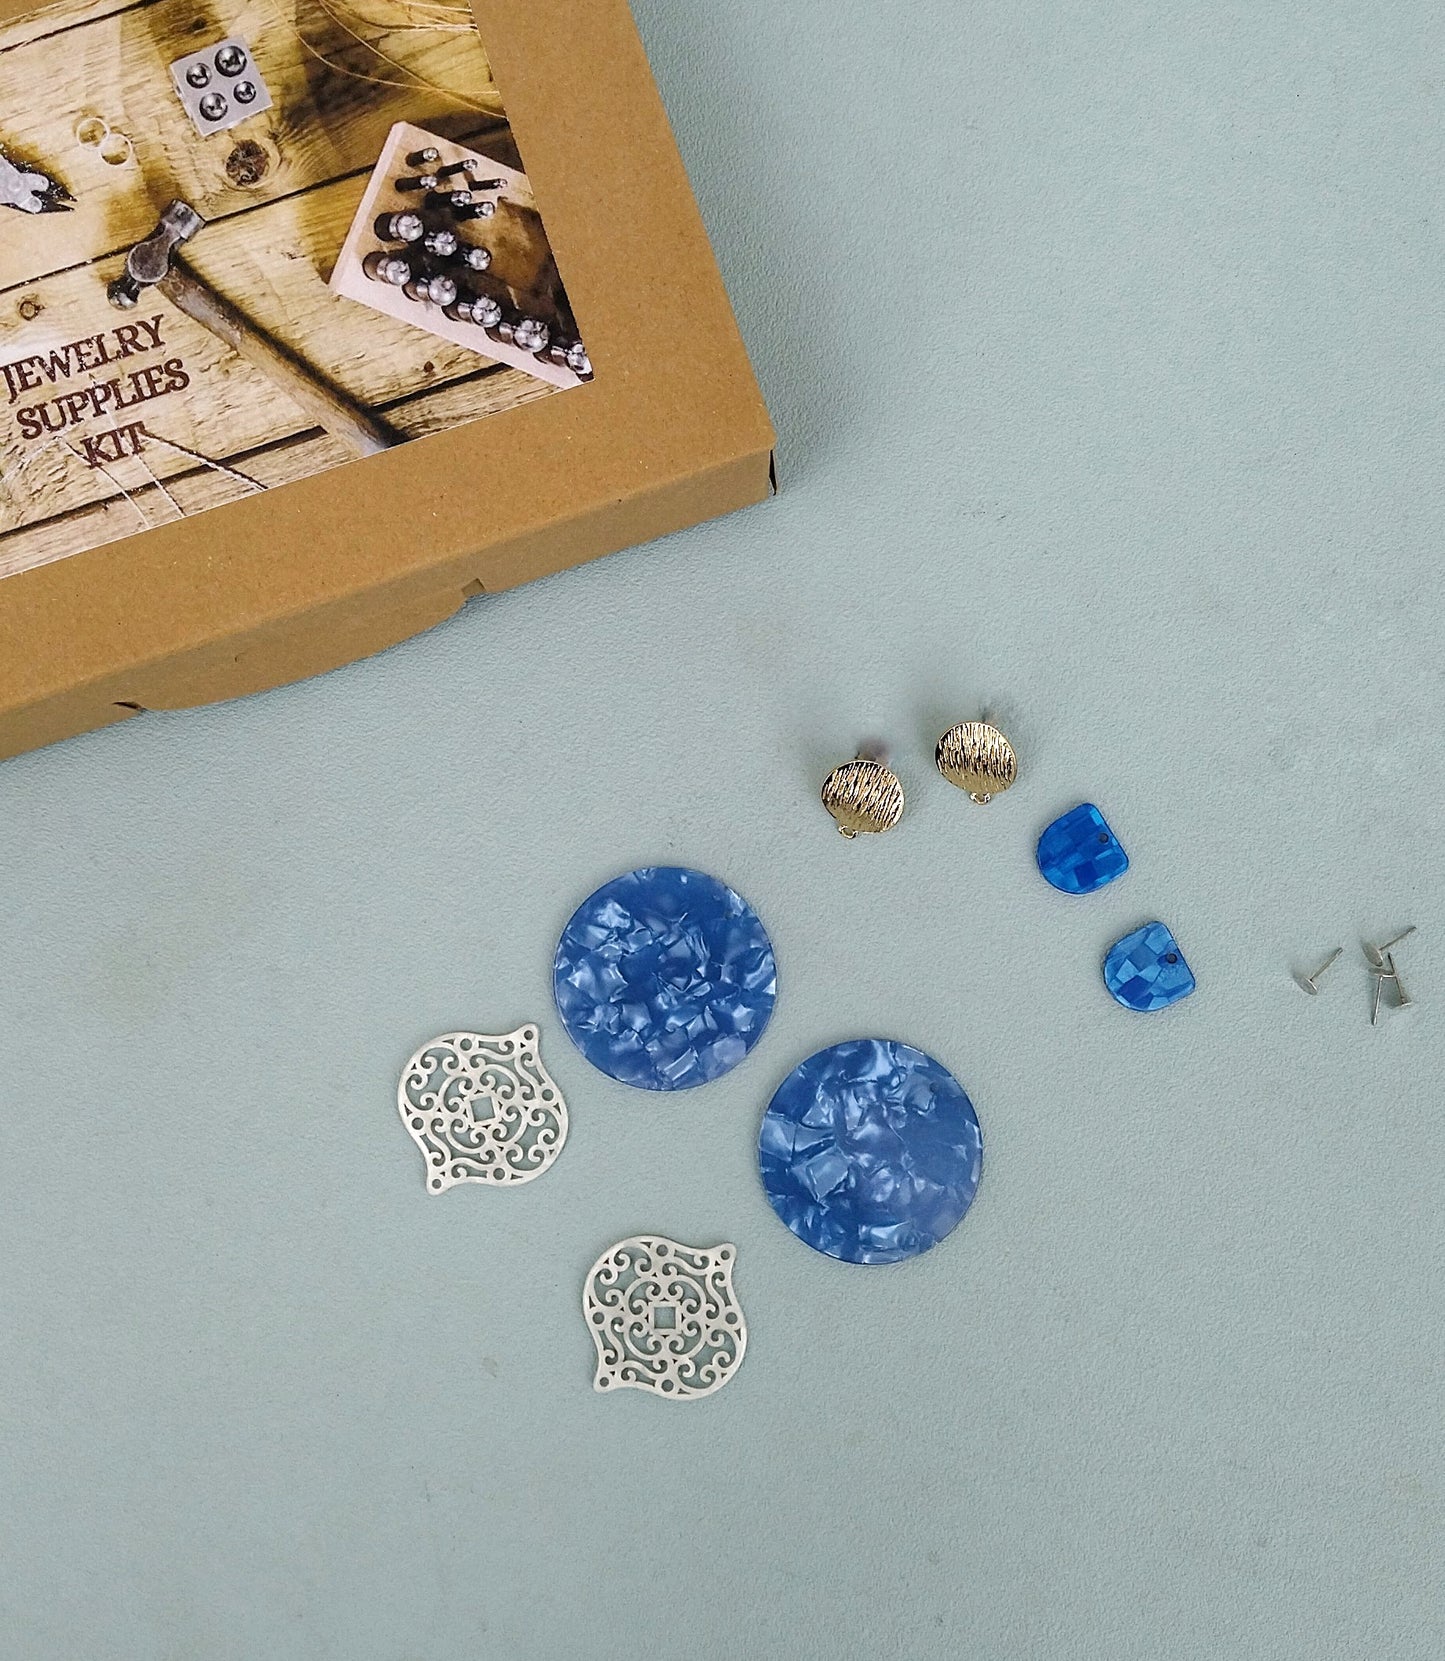 Jewelry Making For Beginners, Cobalt Blue And White Moroccan Earrings